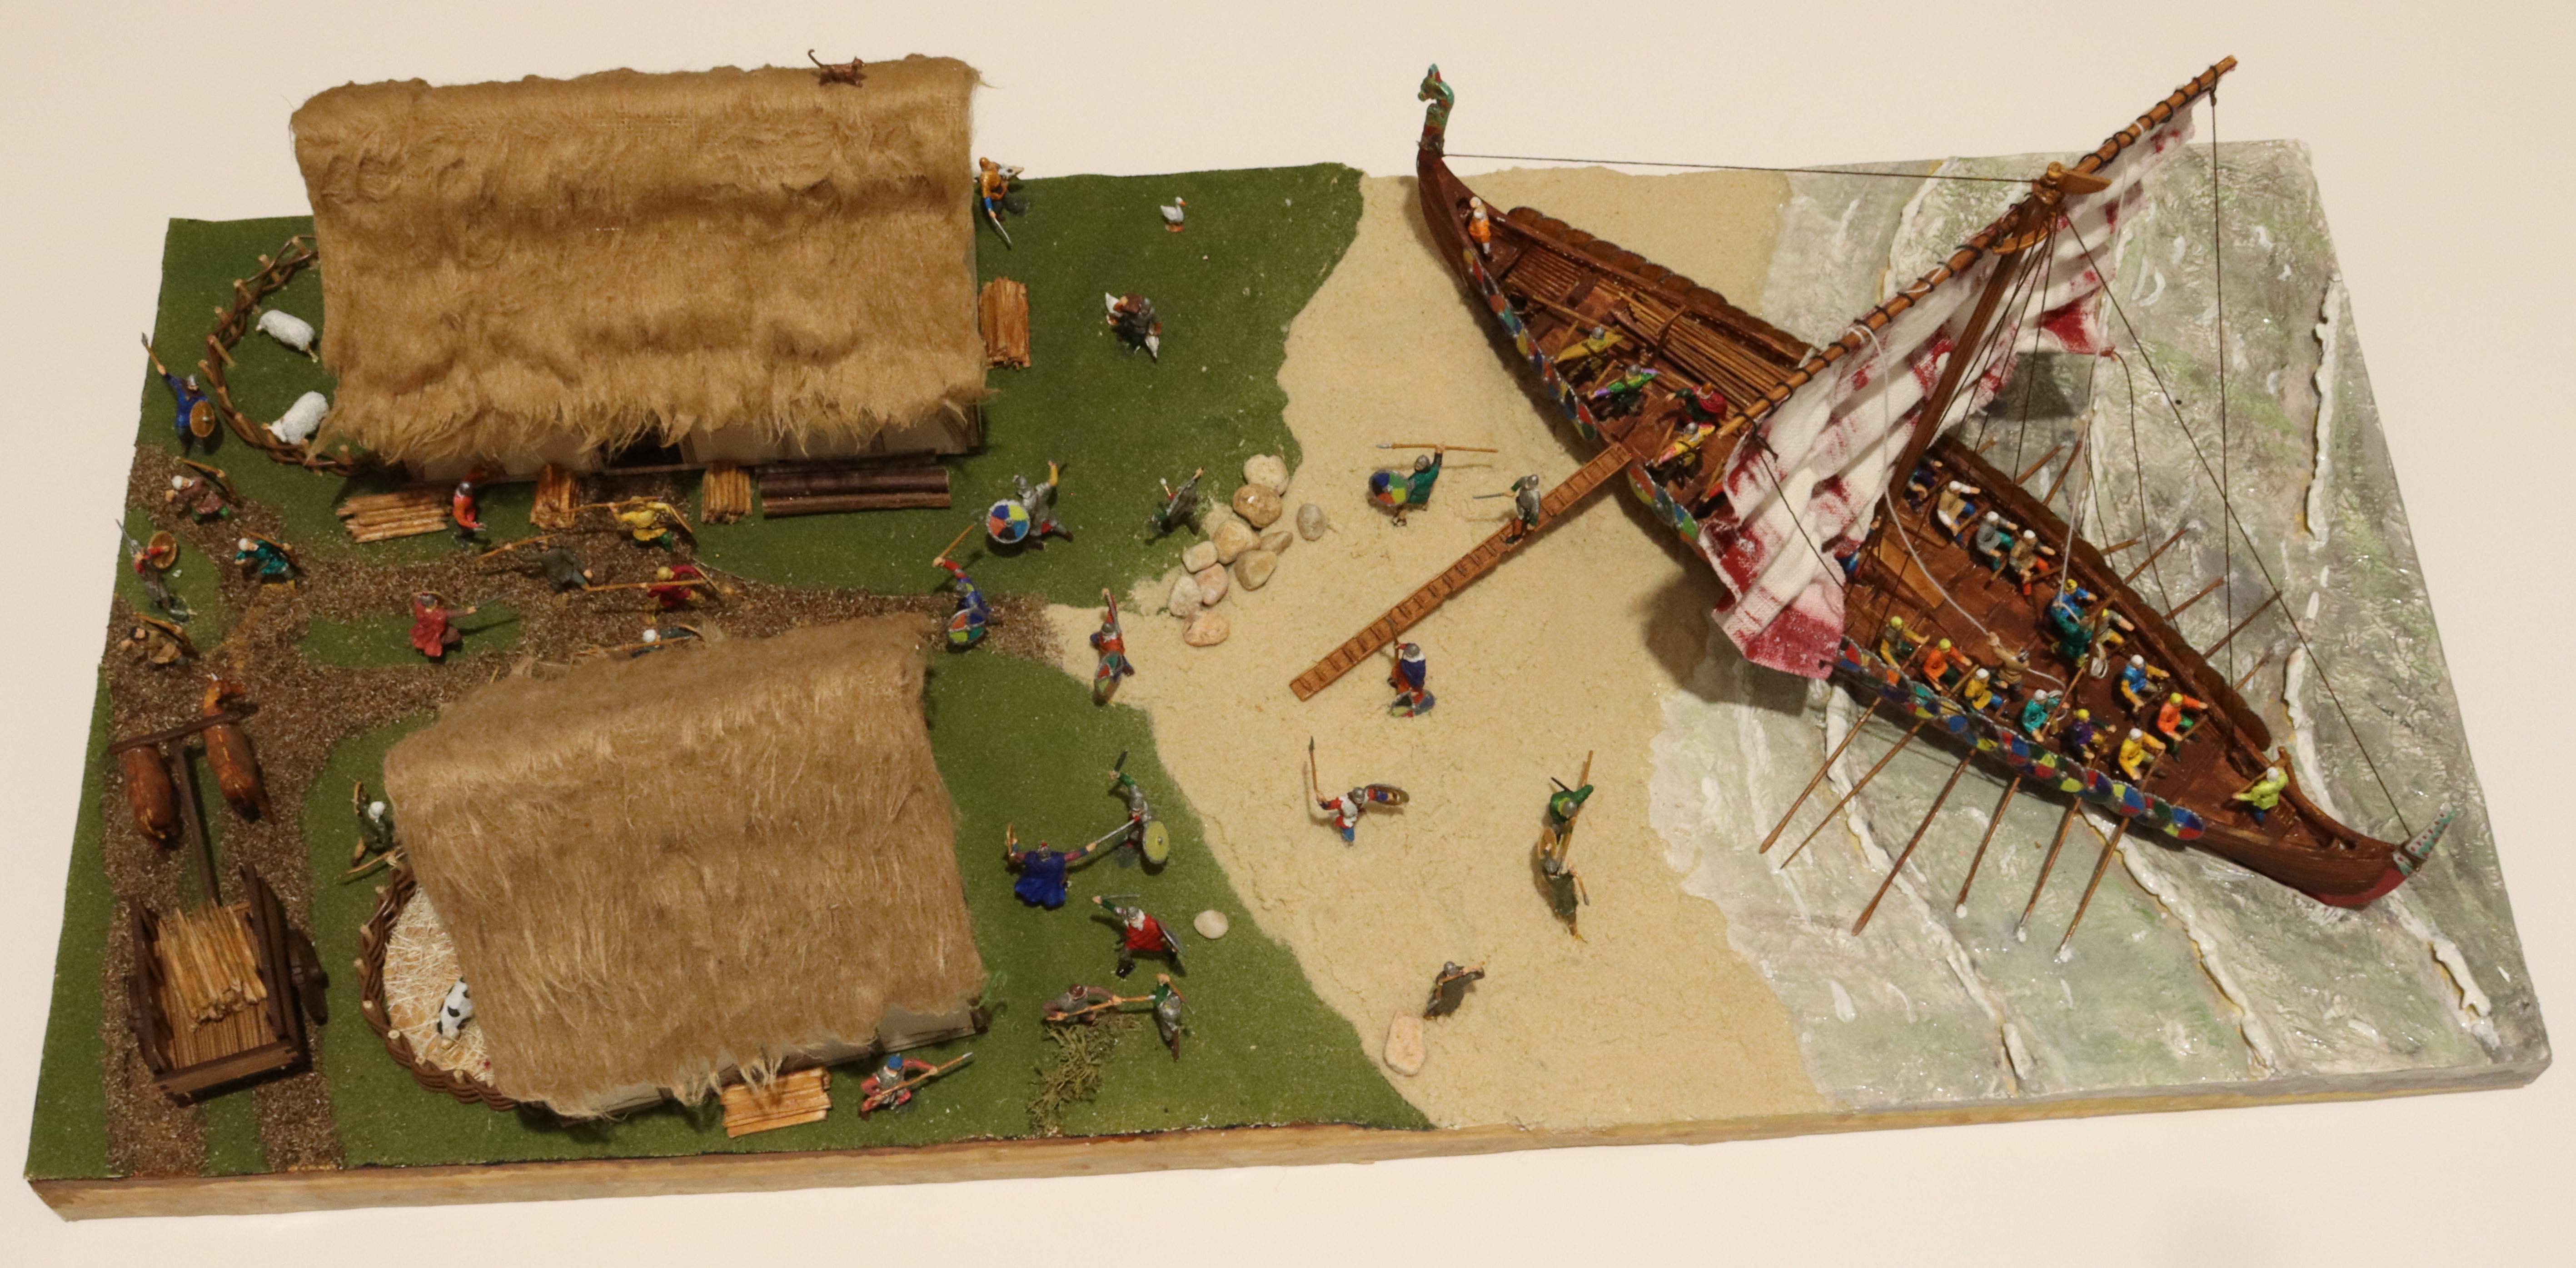 The  diorama is centred on the Emhar EM9001 'Gokstad' 9th Century Viking Ship in 1:72 Scale